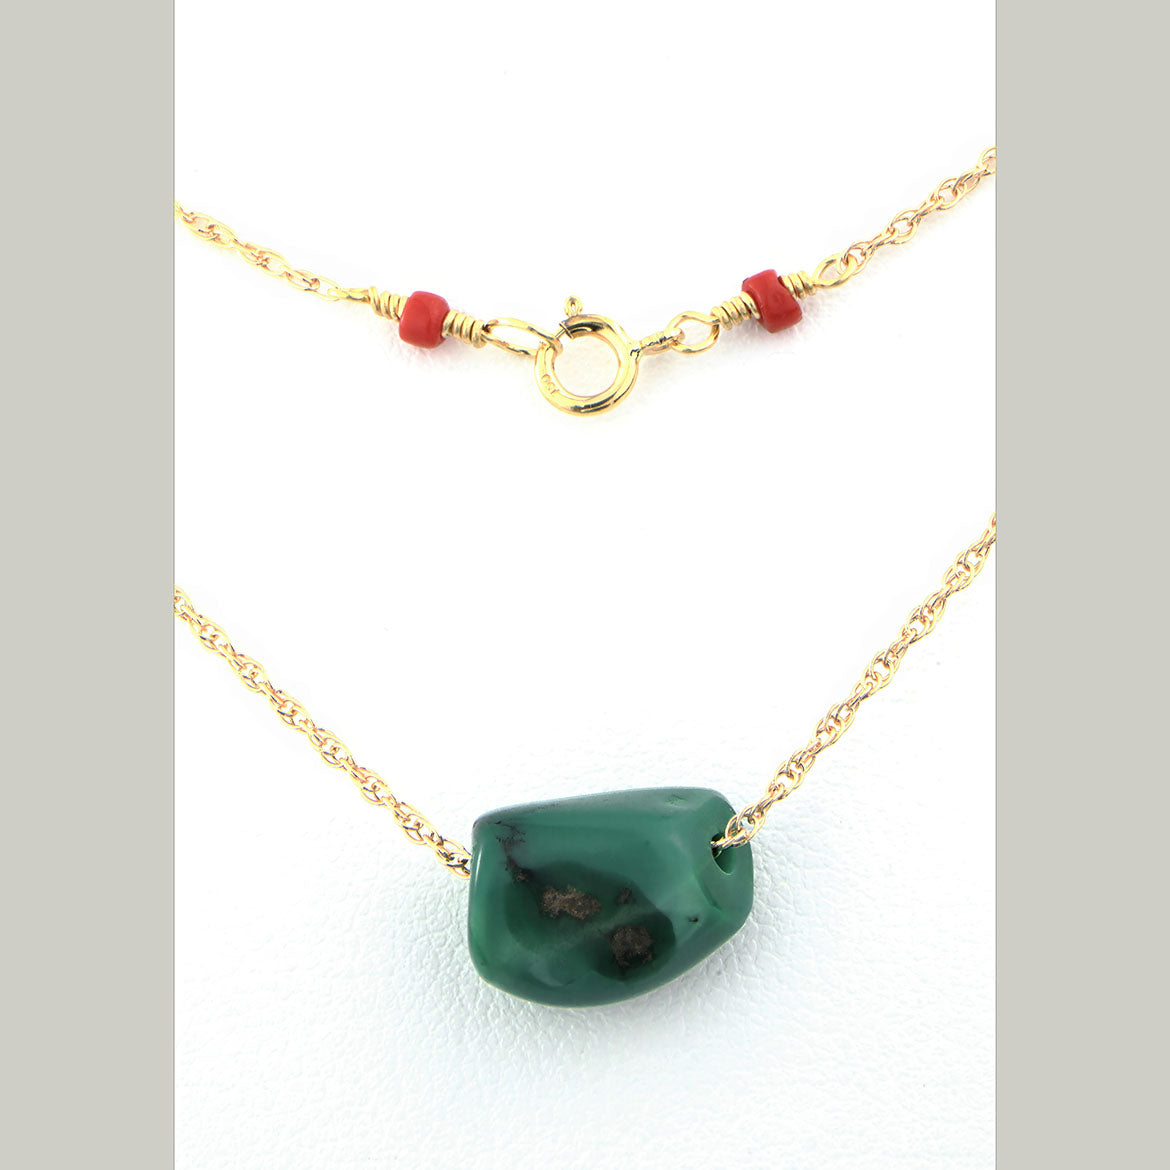 Tibetan Turquoise with Coral on Gold